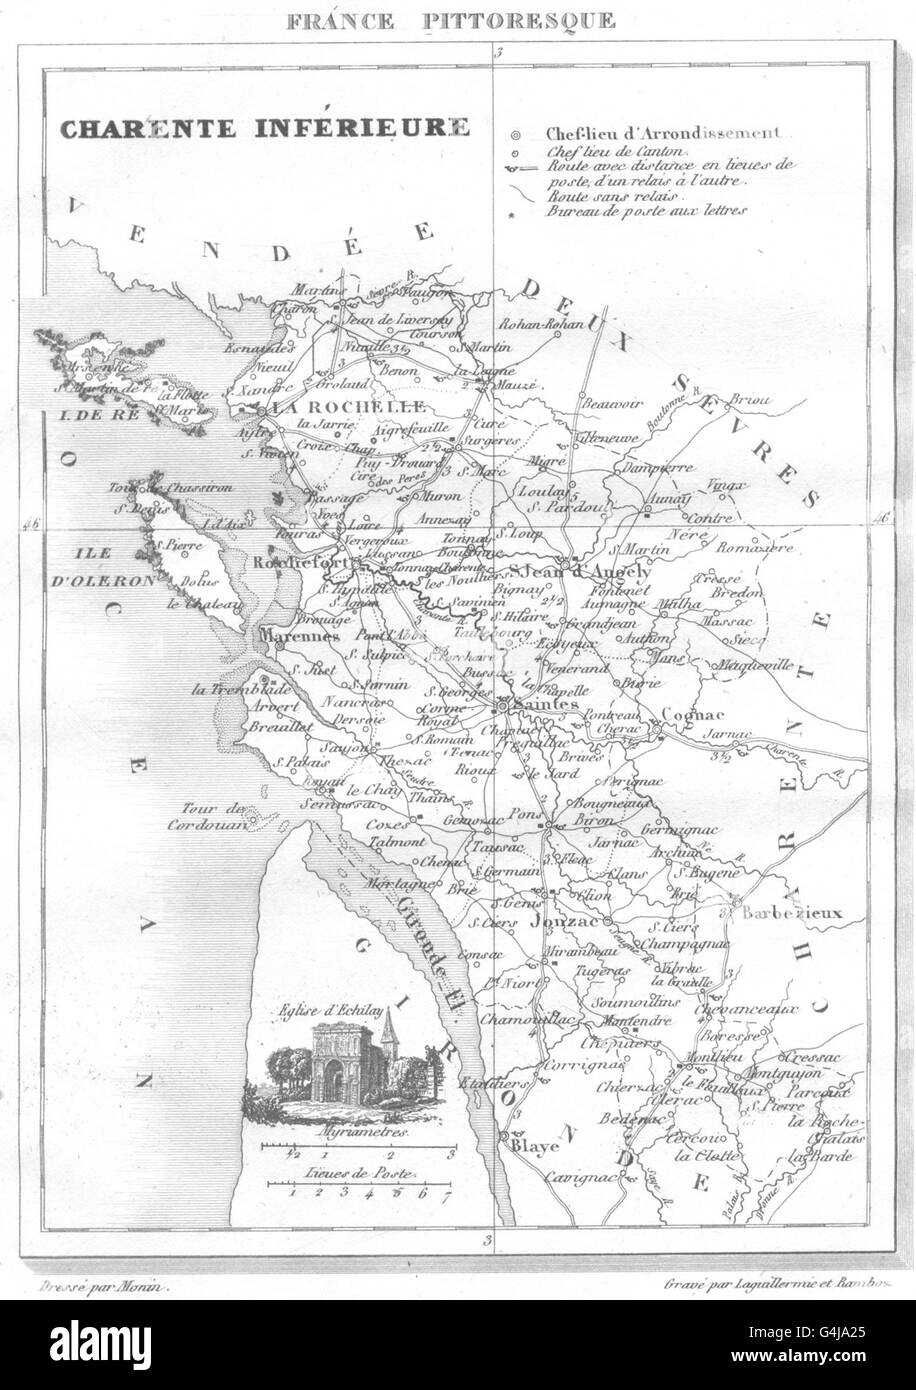 Charente map Black and White Stock Photos & Images - Alamy